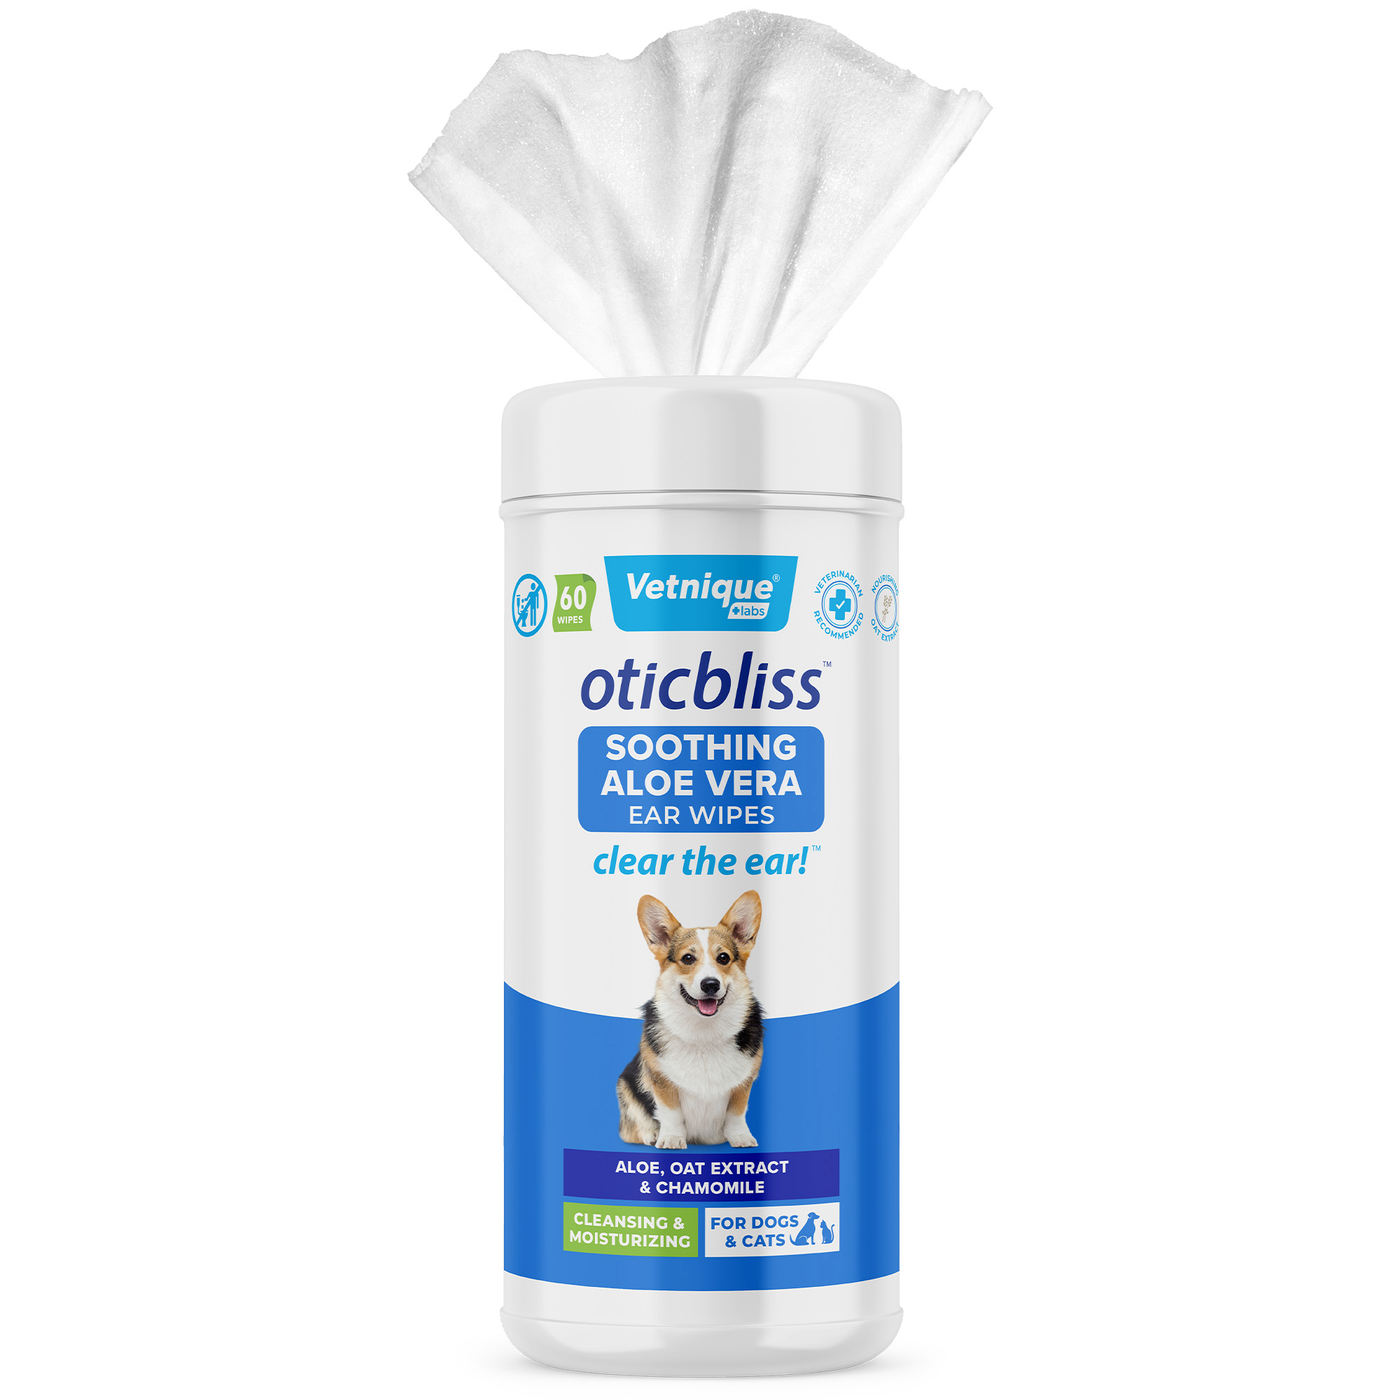 Oticbliss™ Aloe Vera Ear Wipes For Dogs - 60 ct